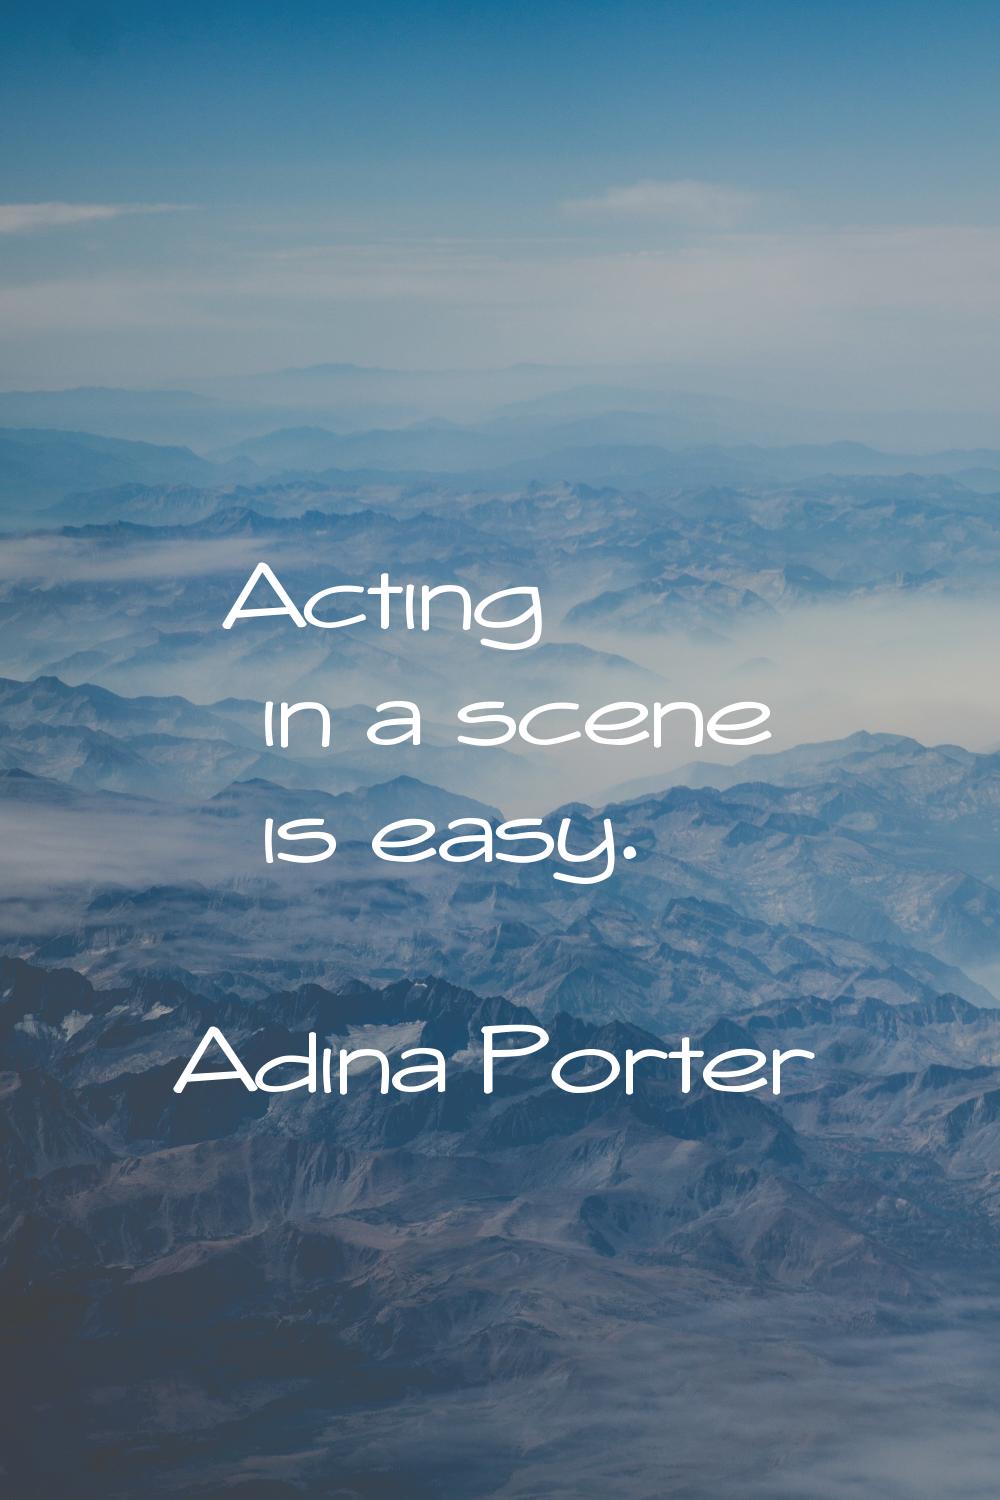 Acting in a scene is easy.